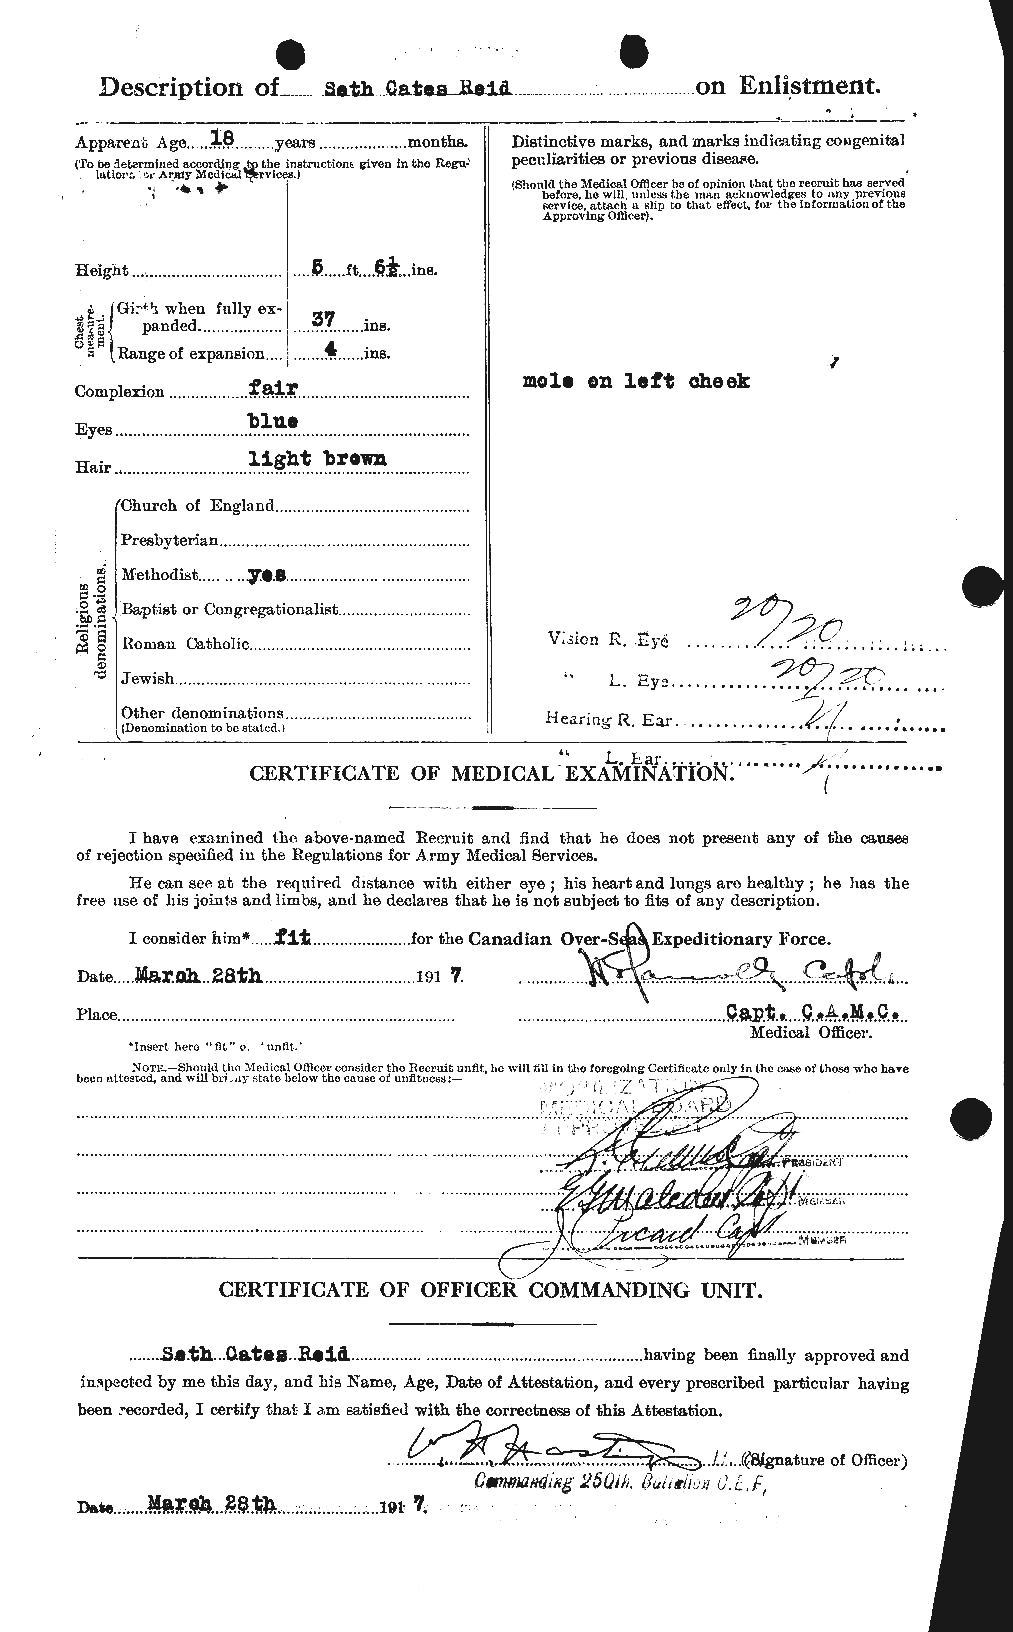 Personnel Records of the First World War - CEF 601957b